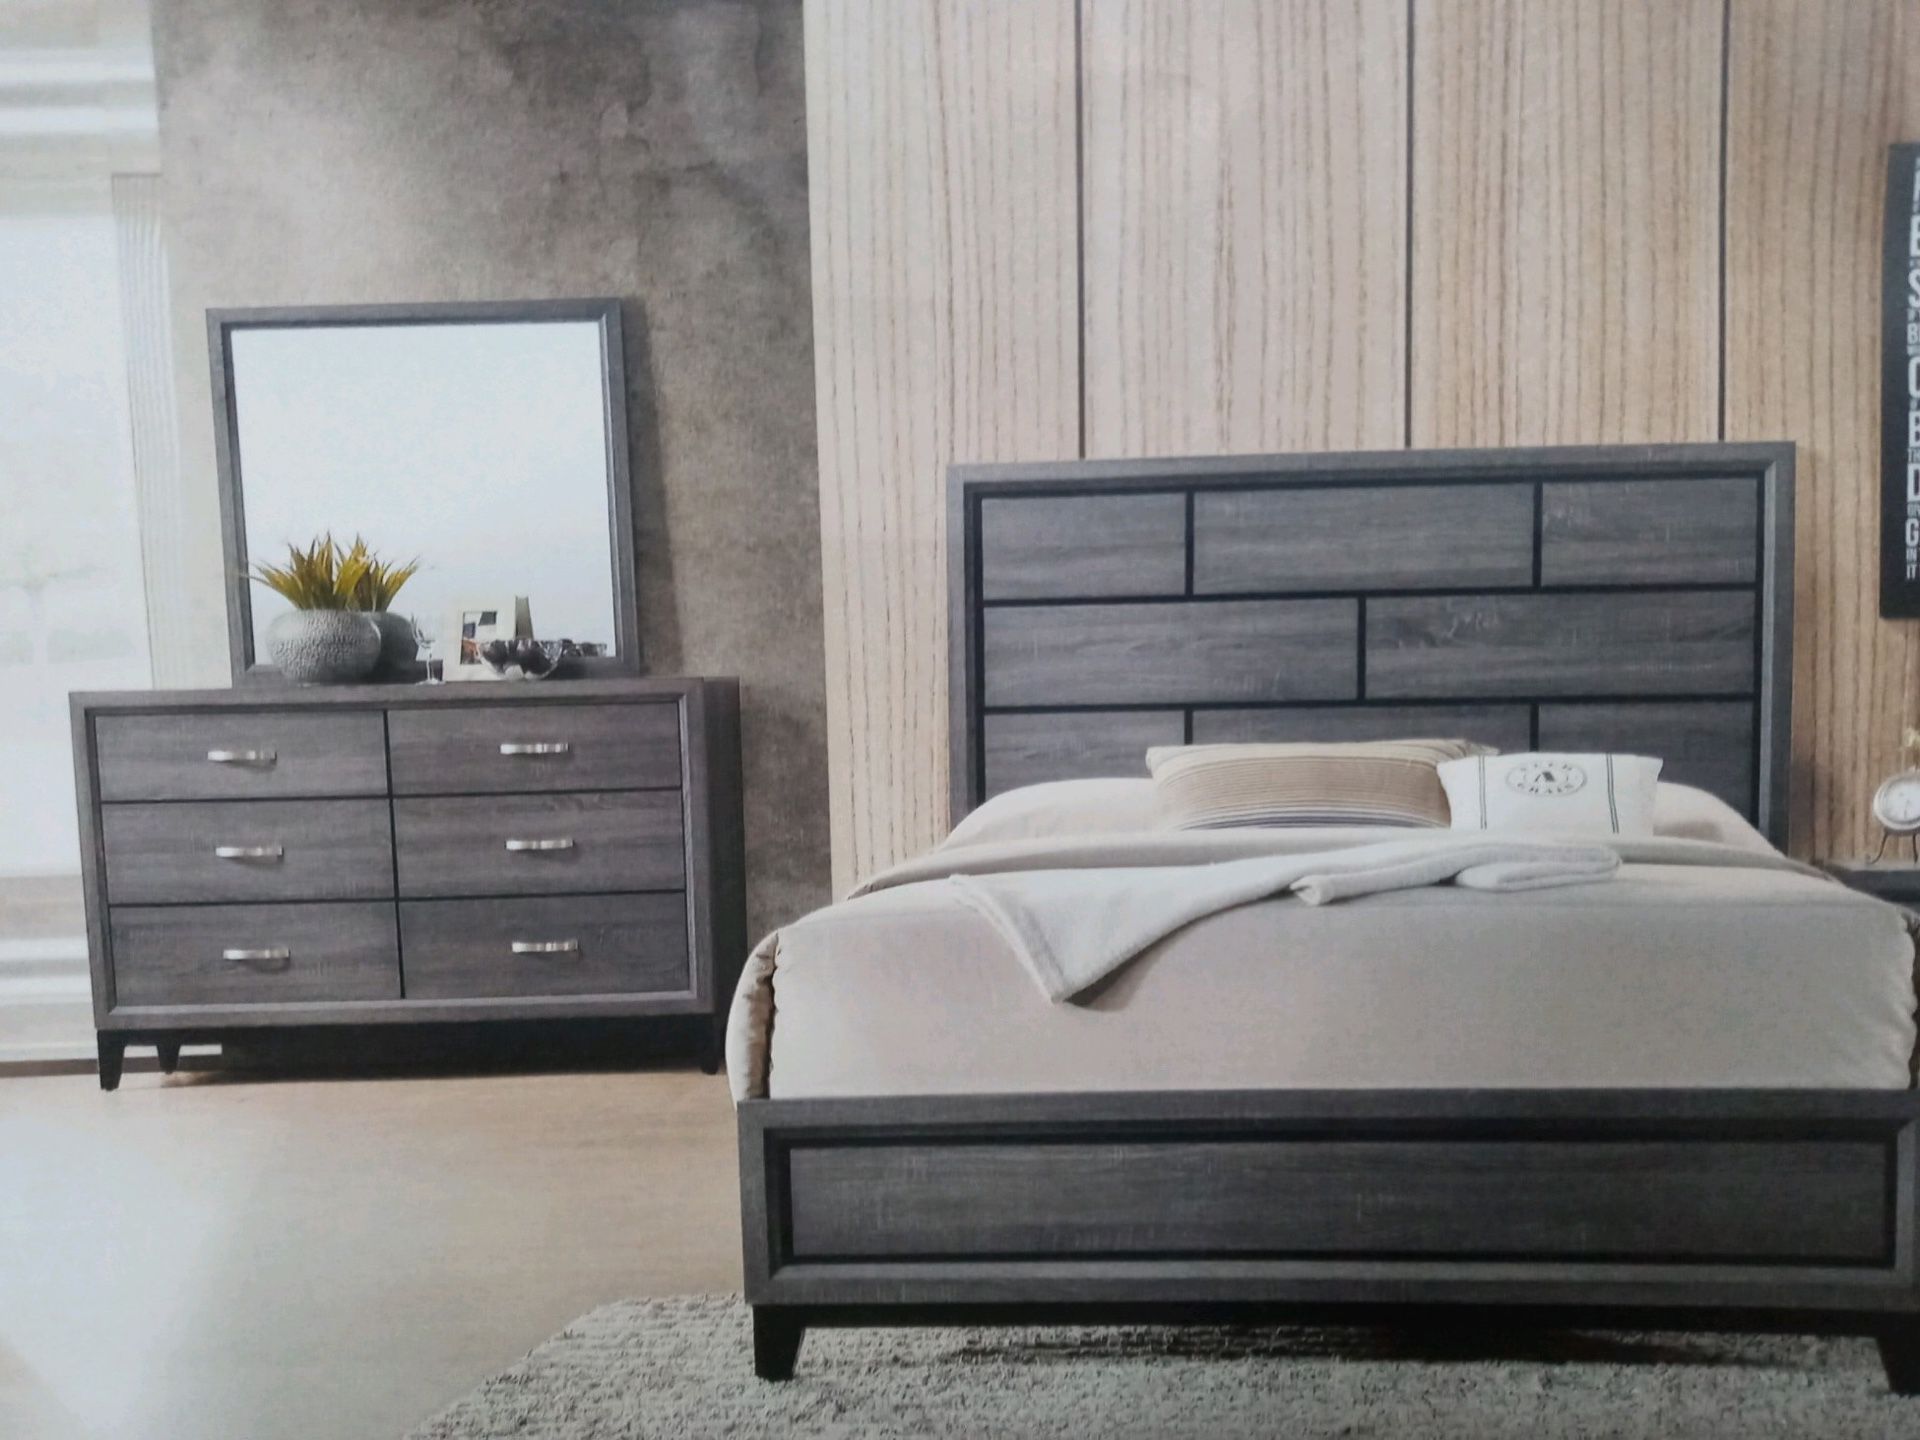  Brand New Queen Size Bedroom Set&799.financing  Available No Credit Needed 